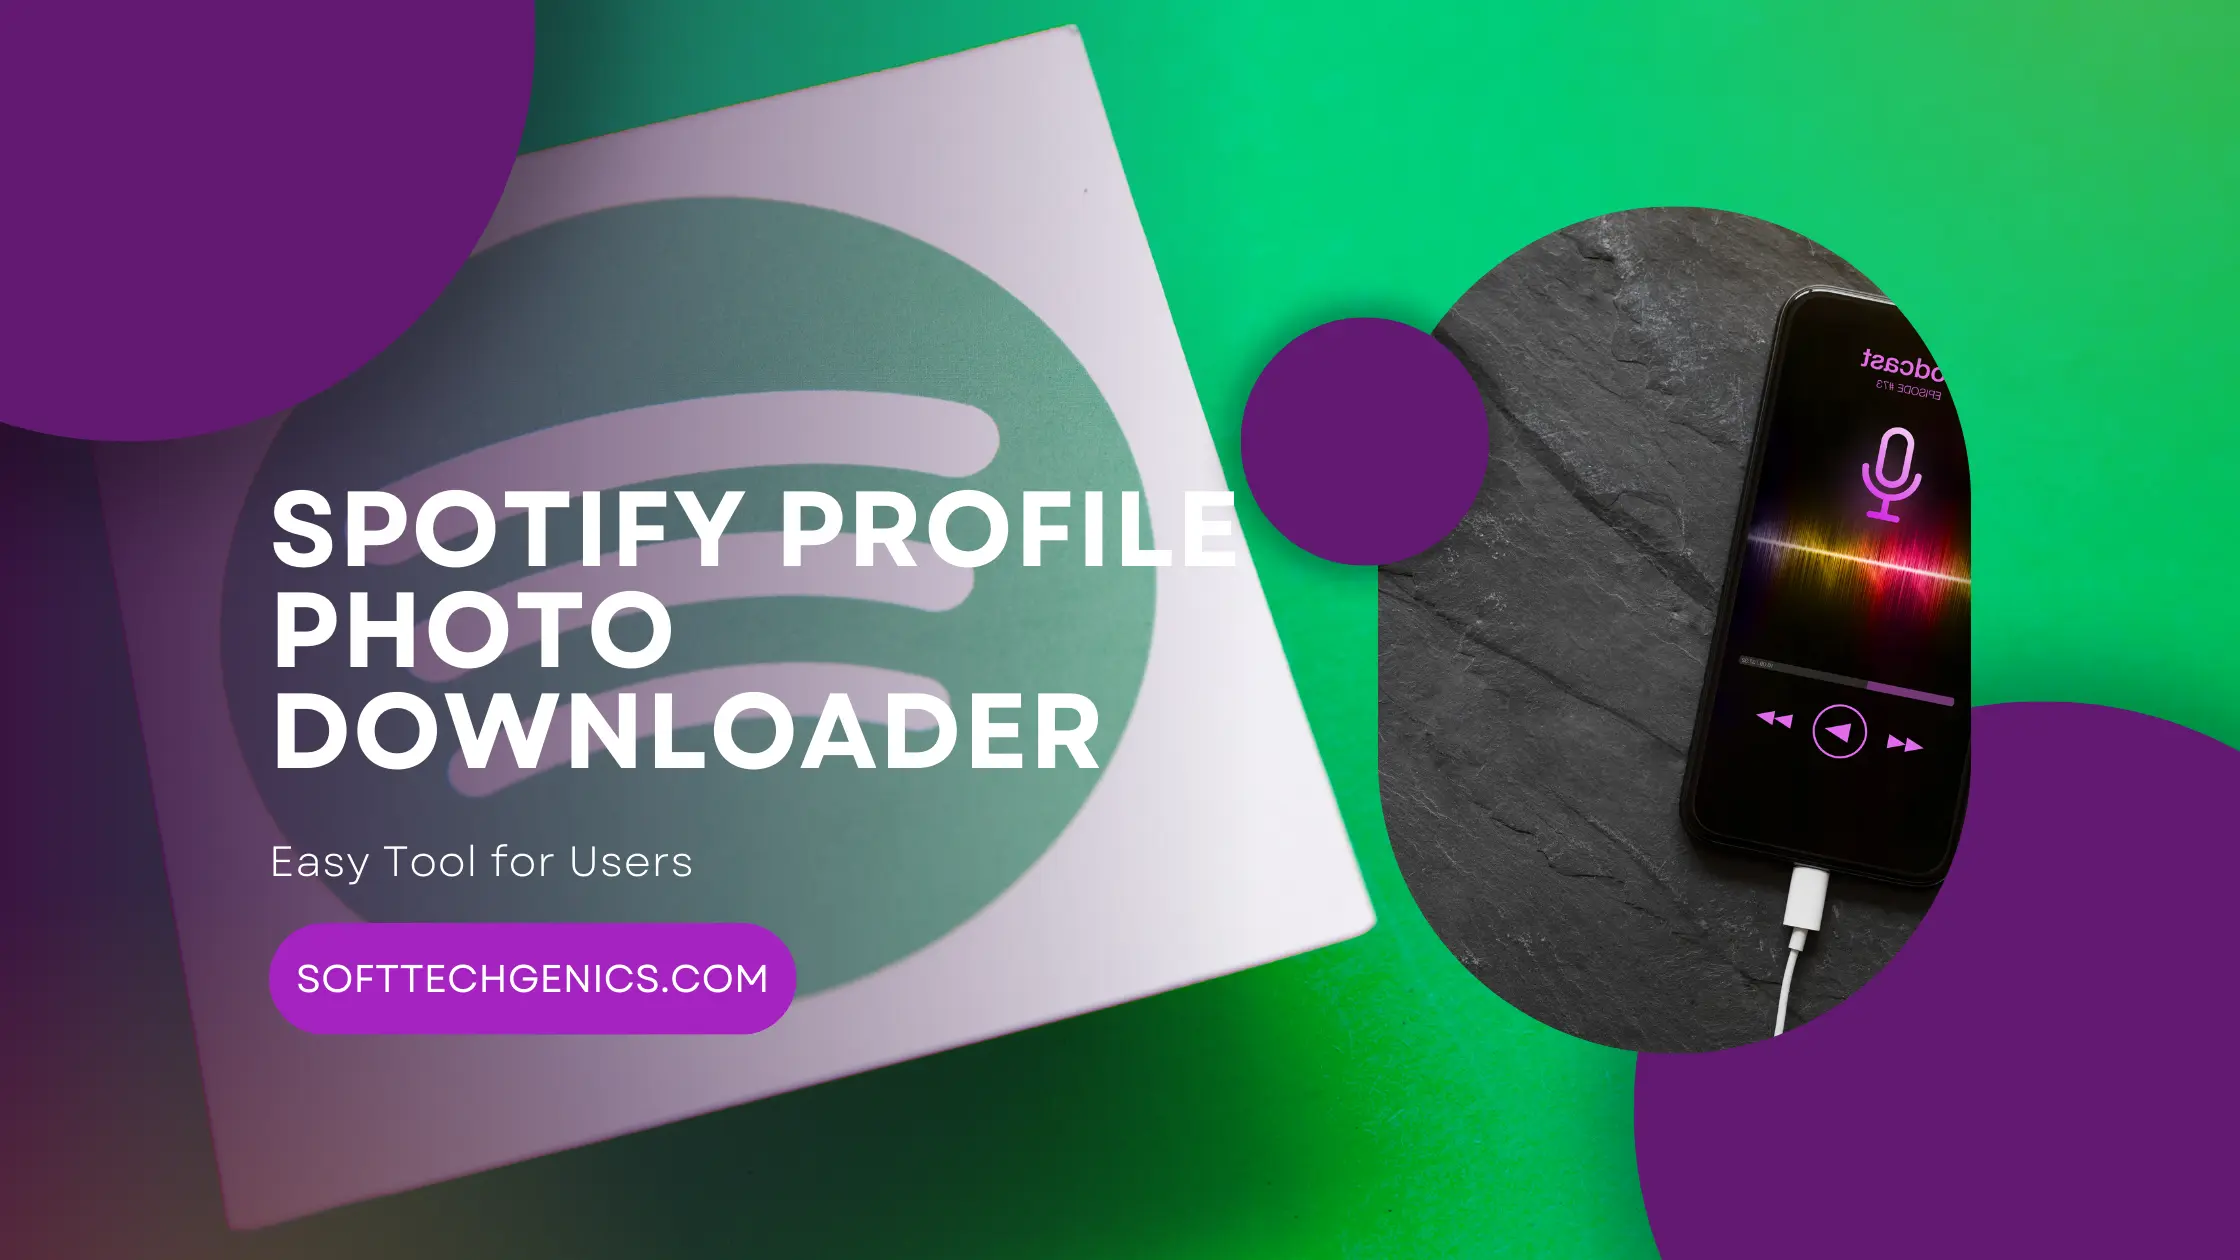 Spotify Profile Photo Downloader: Easy Tool for Users